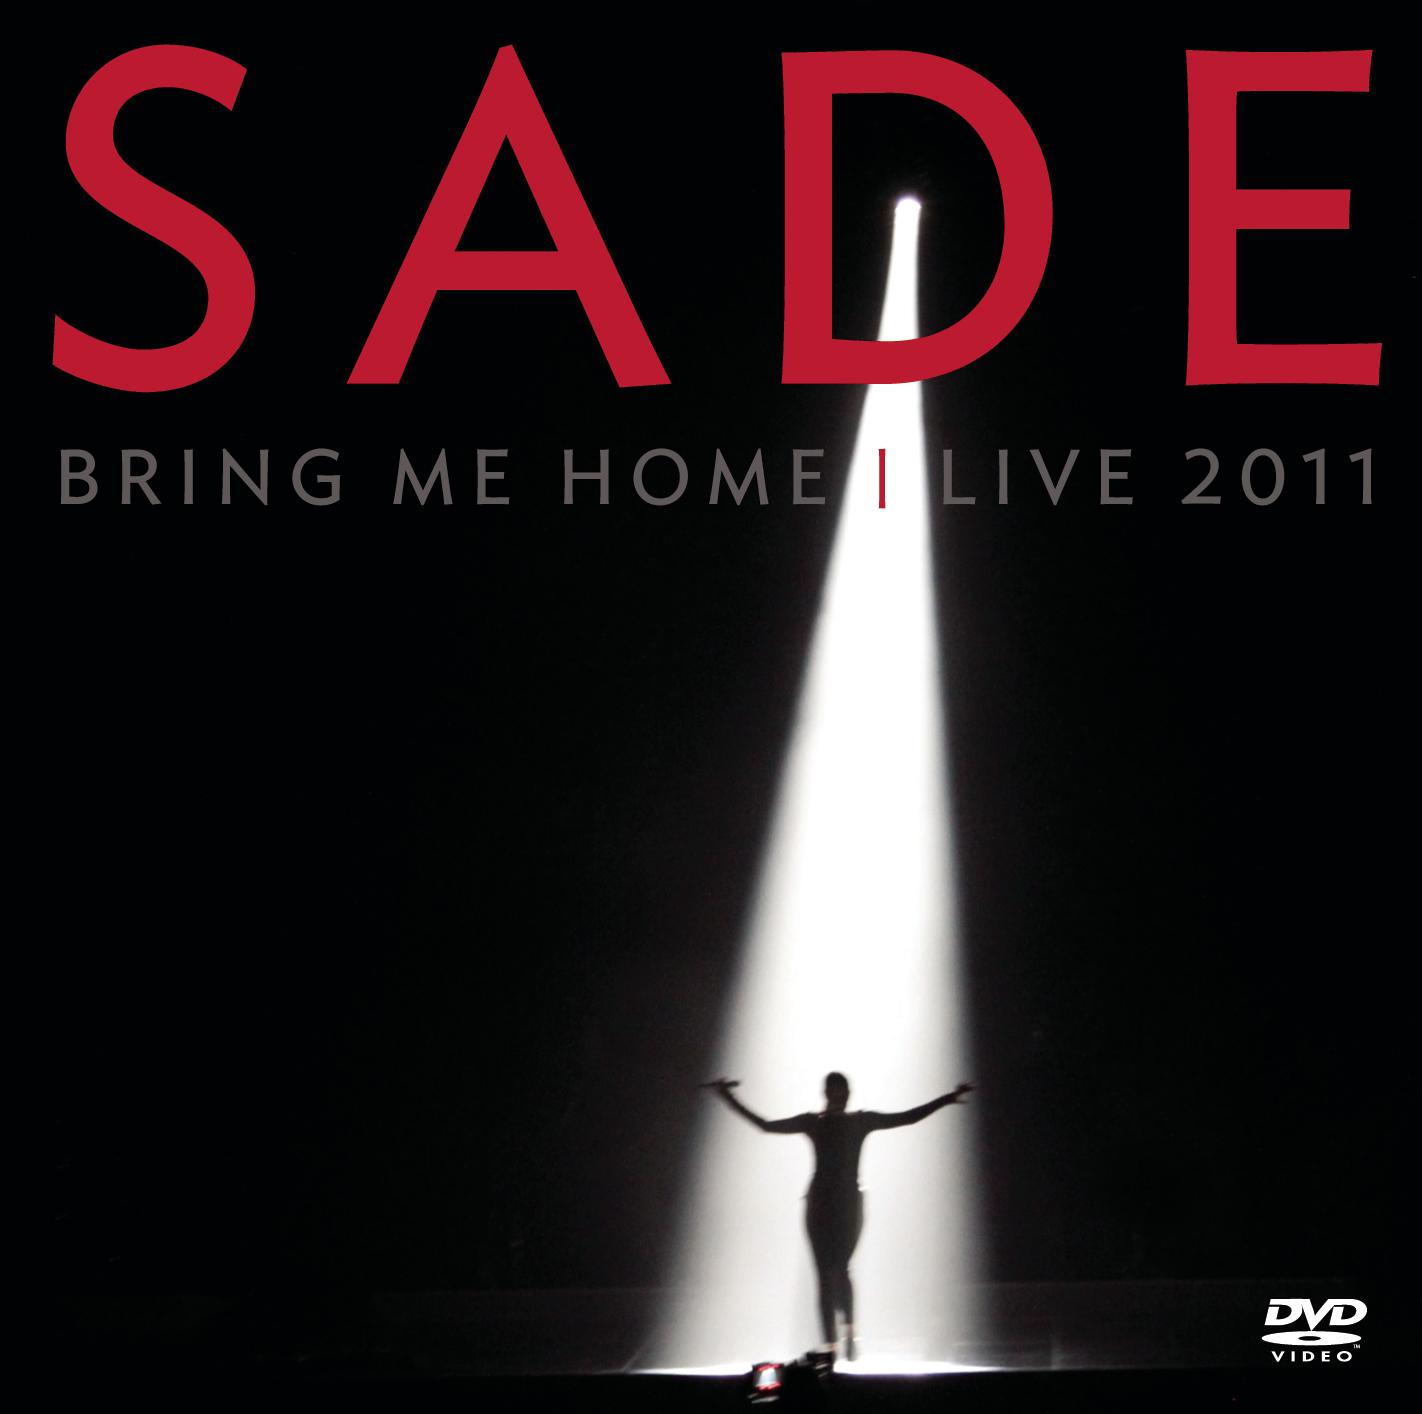 Bring Me Home – Live 2011